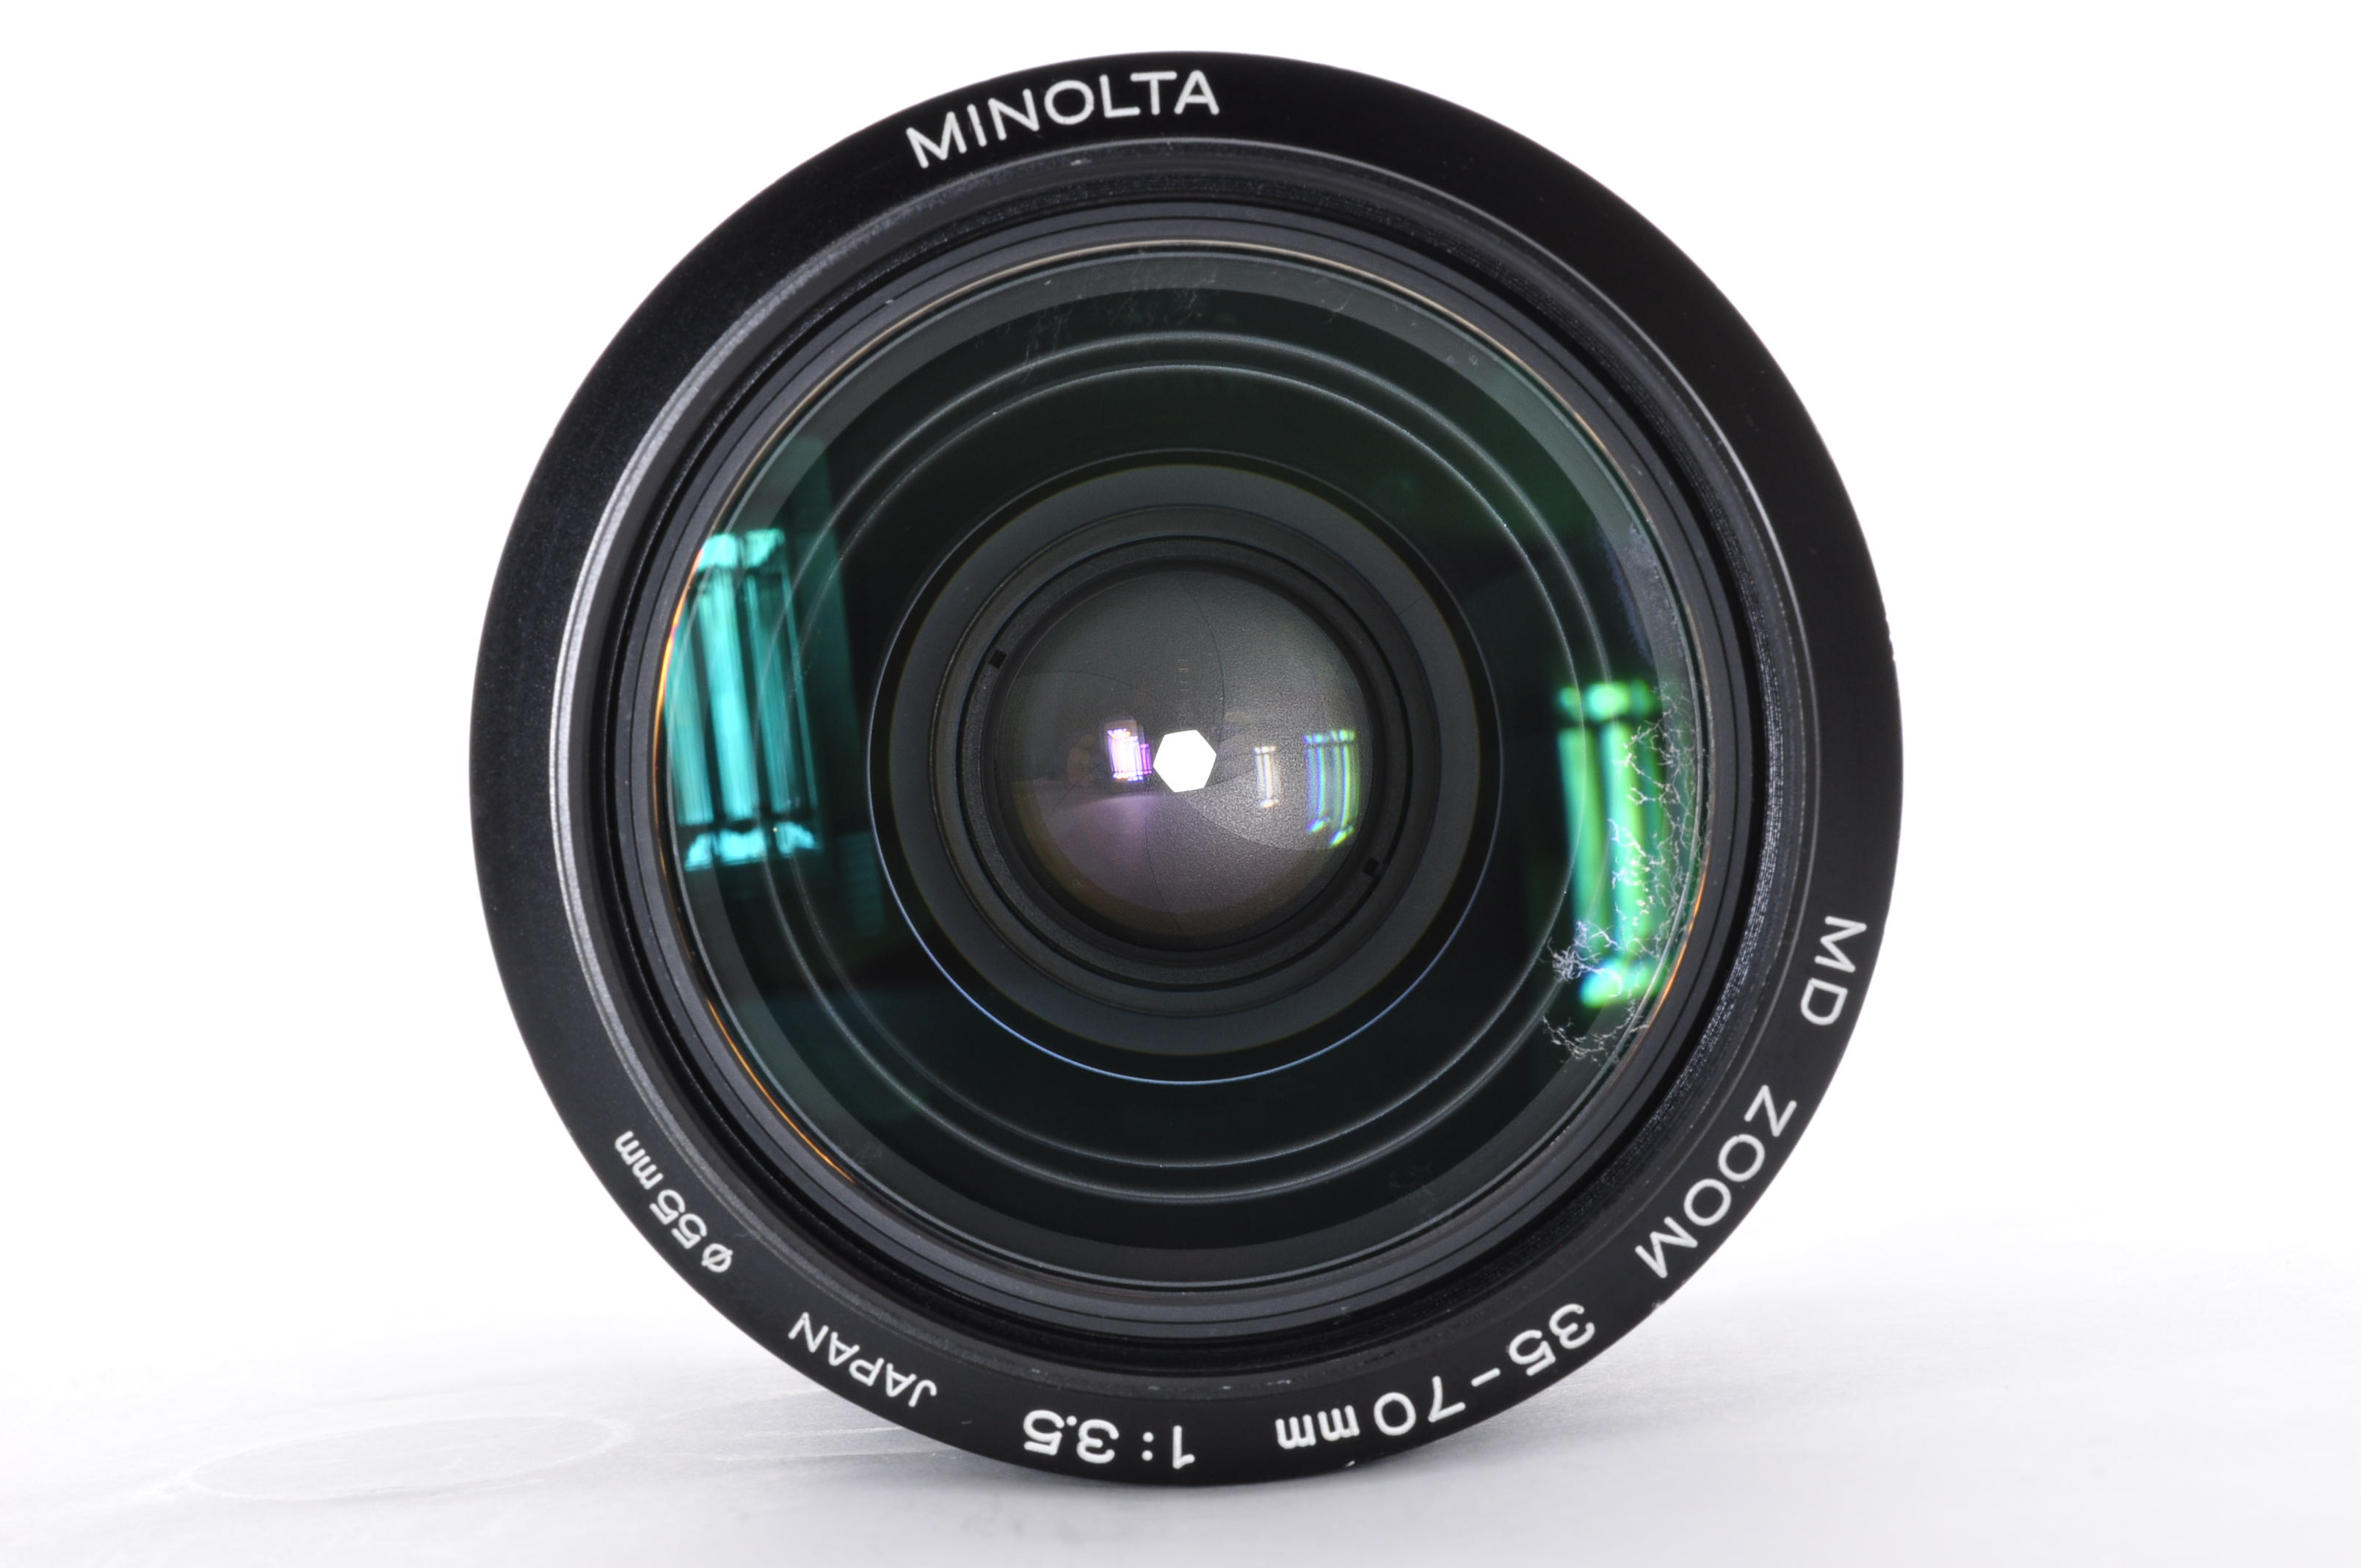 Minolta New MD 35-70mm f/3.5 Manual Focus Zoom Lens [Excellent+5] From Japan img07